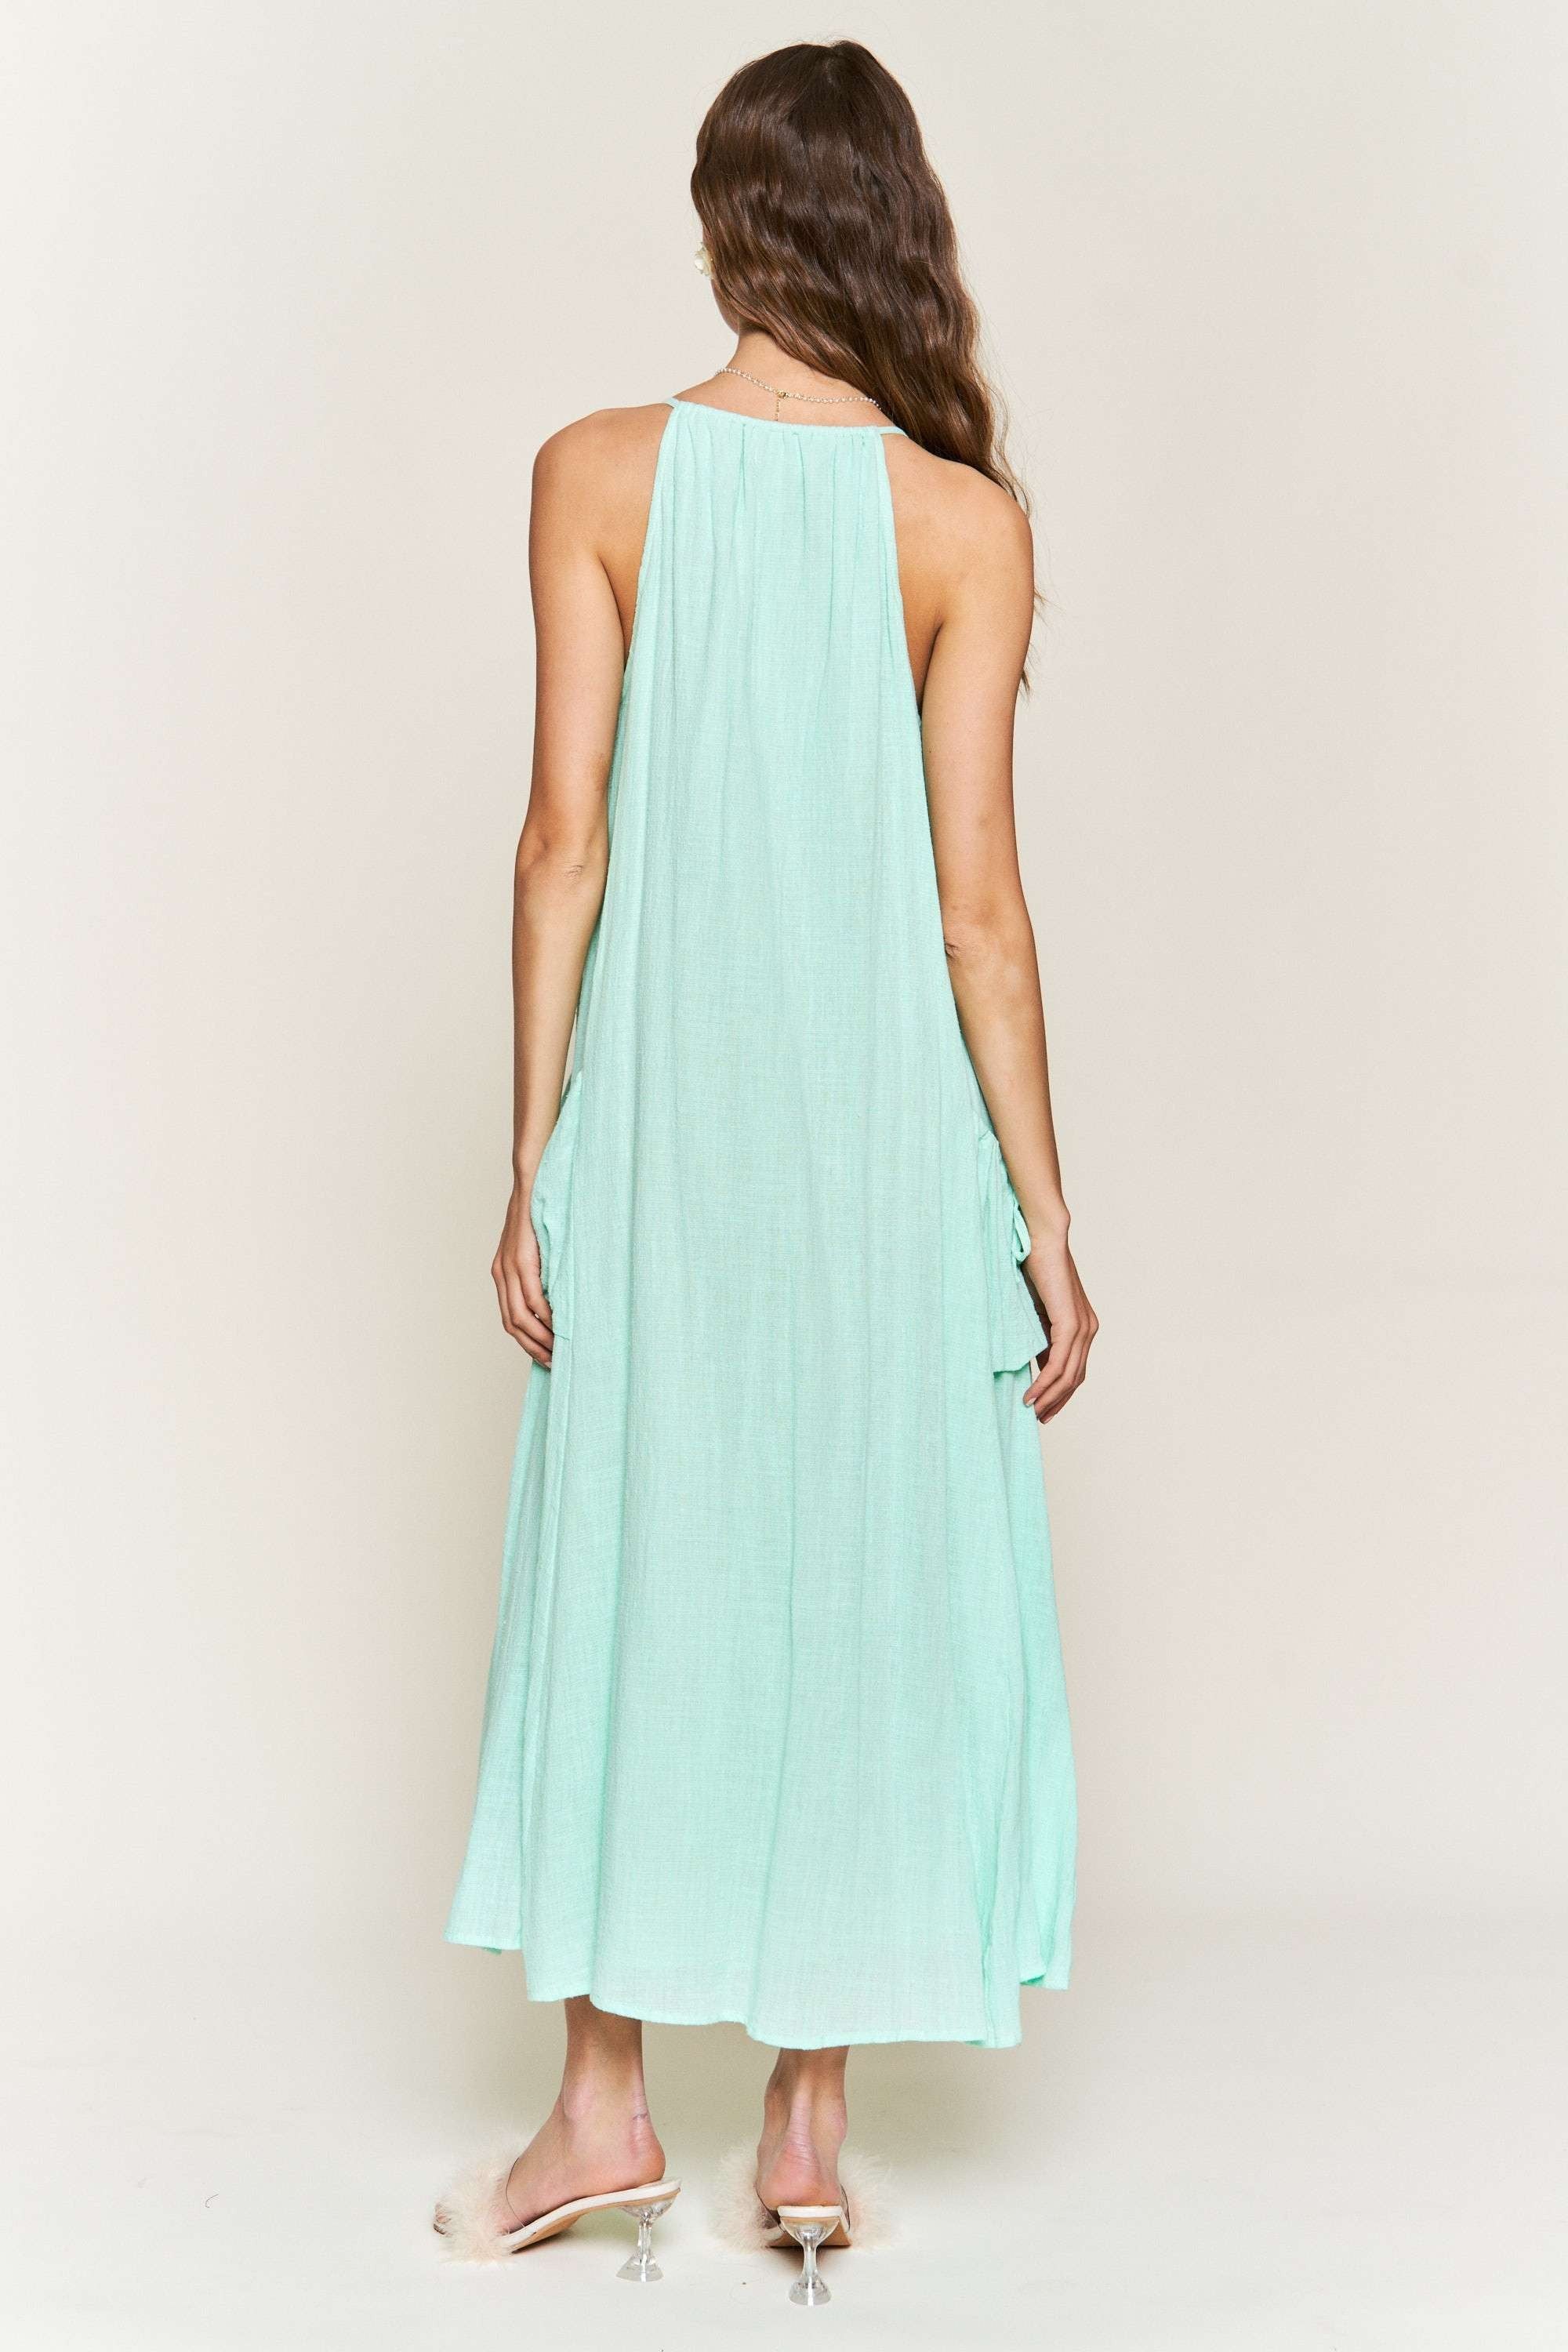 Mint Maxi Dress With Button Details | Collective Request 